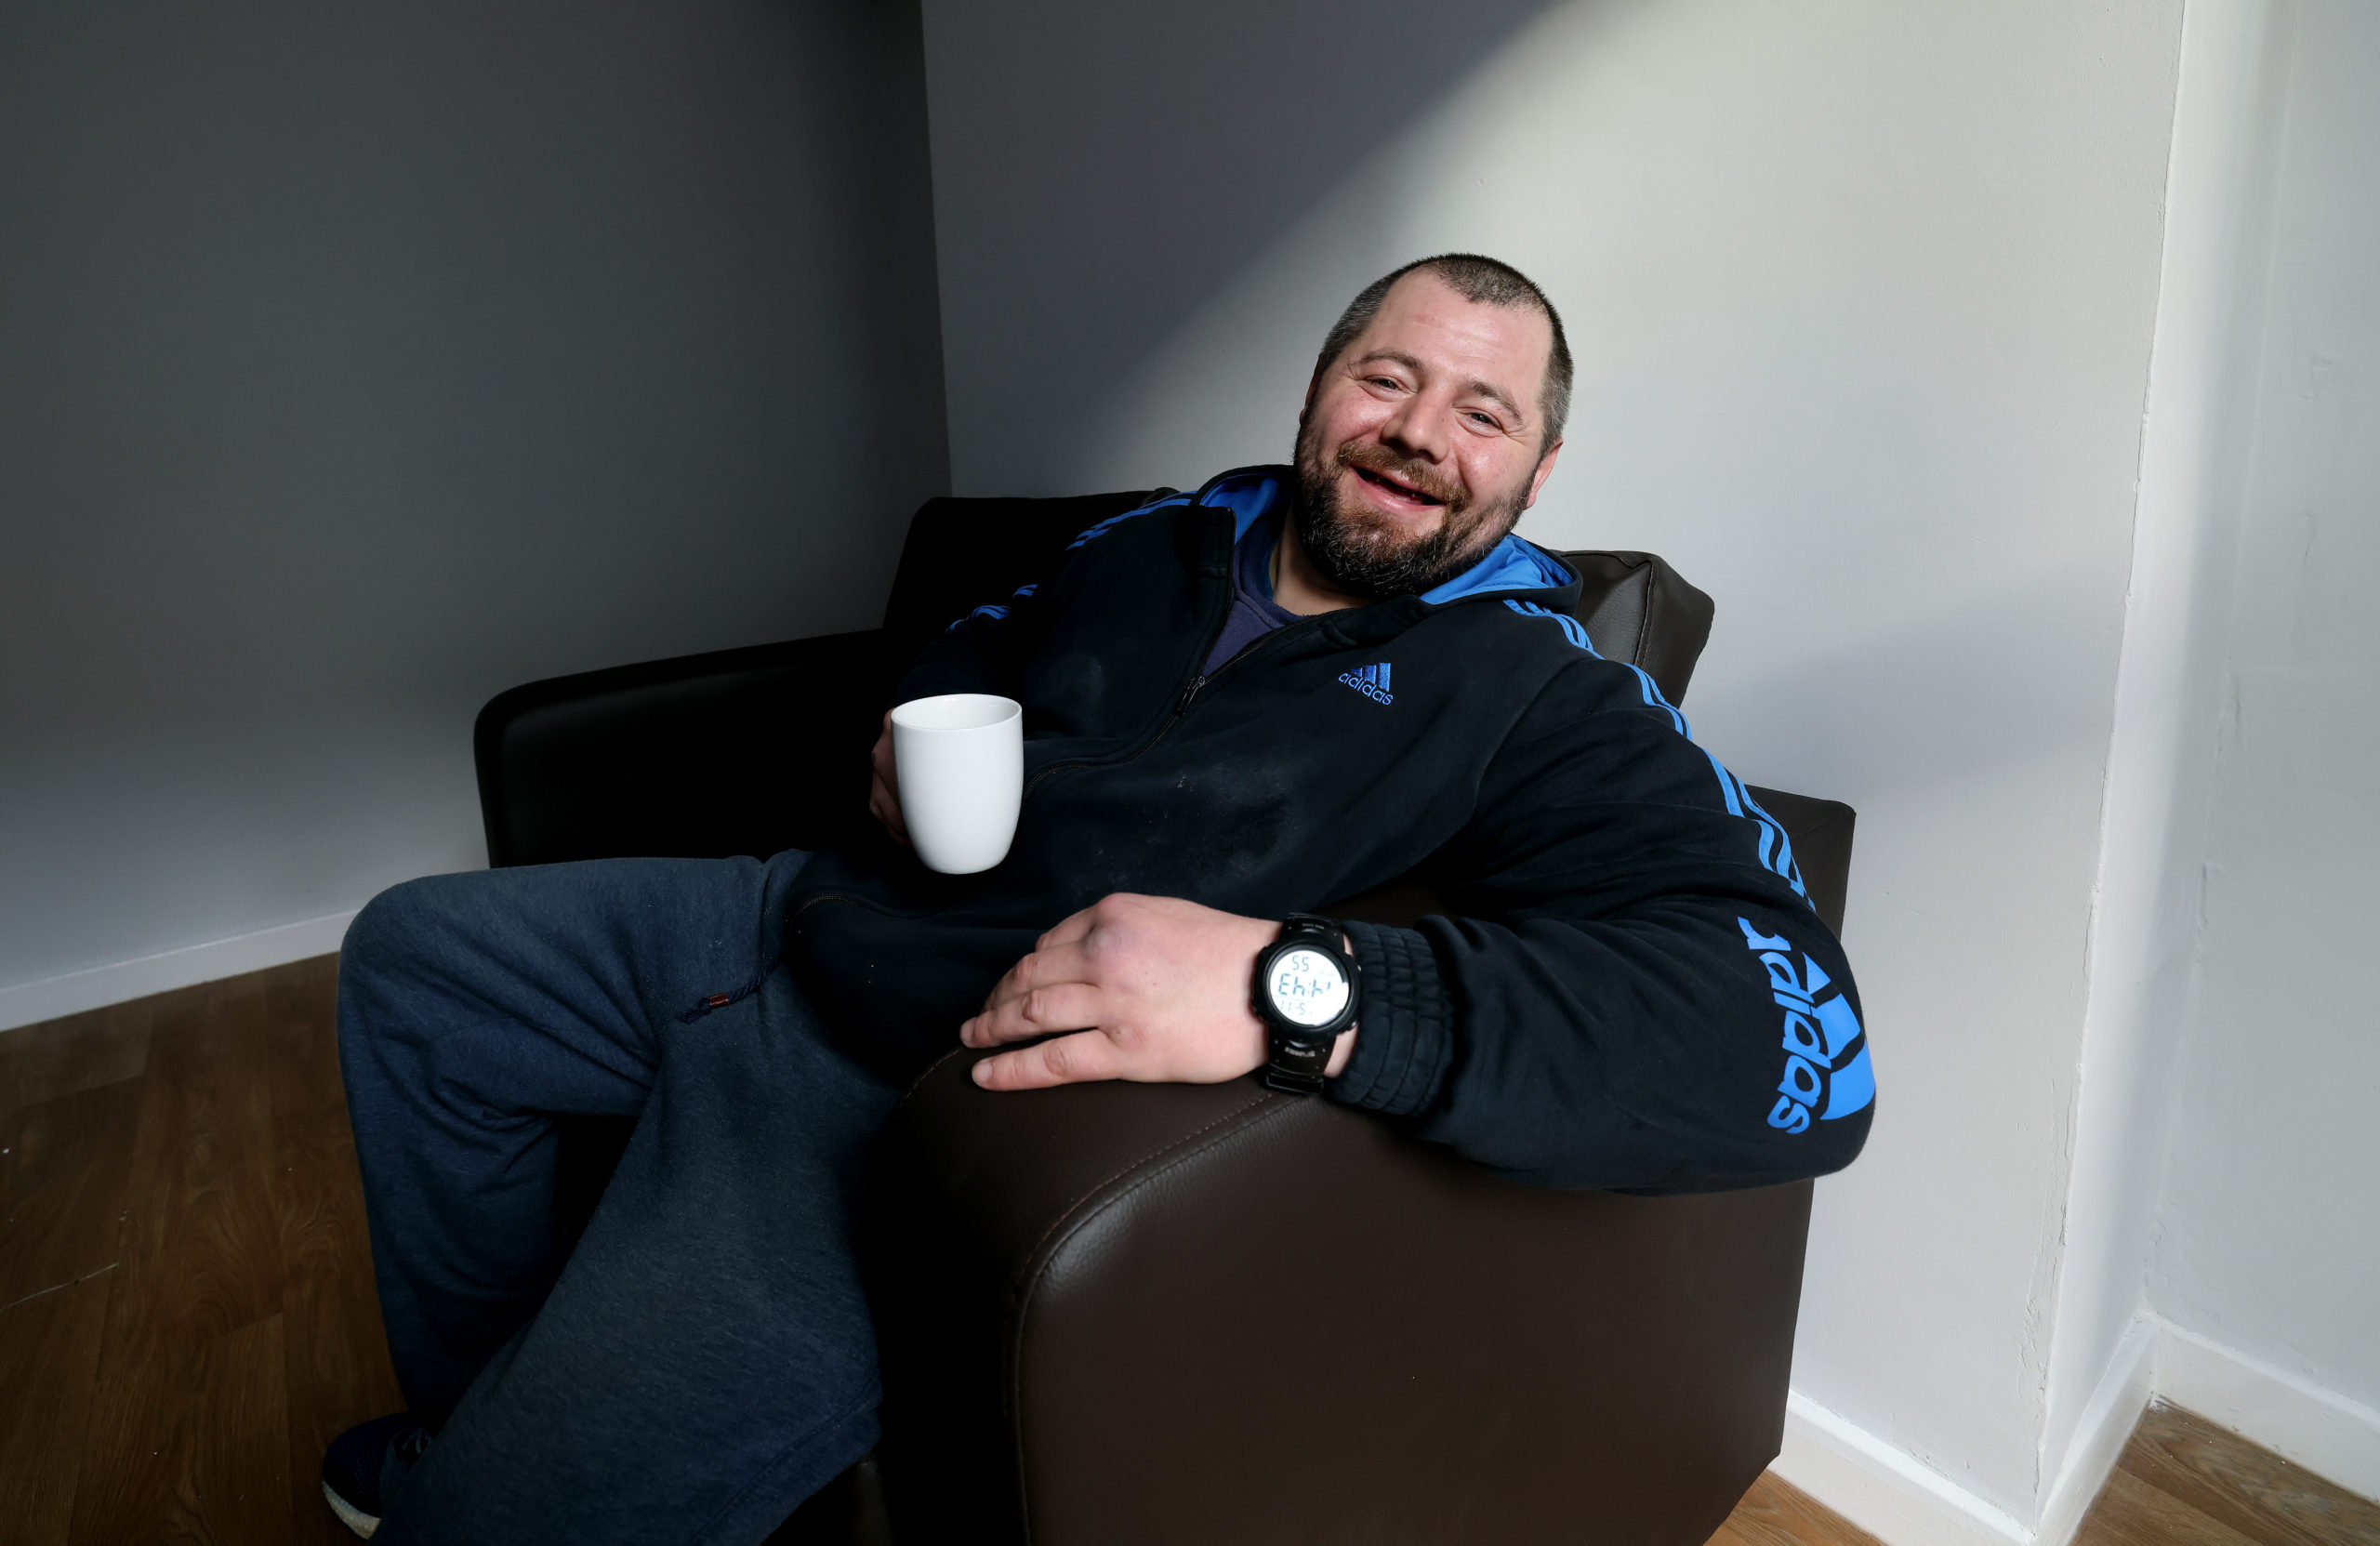 Peter, 40, intermittently slept rough for more than six years but has now moved into a one-bedroom terrace in the city. Under Next Steps Accommodation Programme (NSAP) he is the first person to move into a property with social housing provider Riverside.